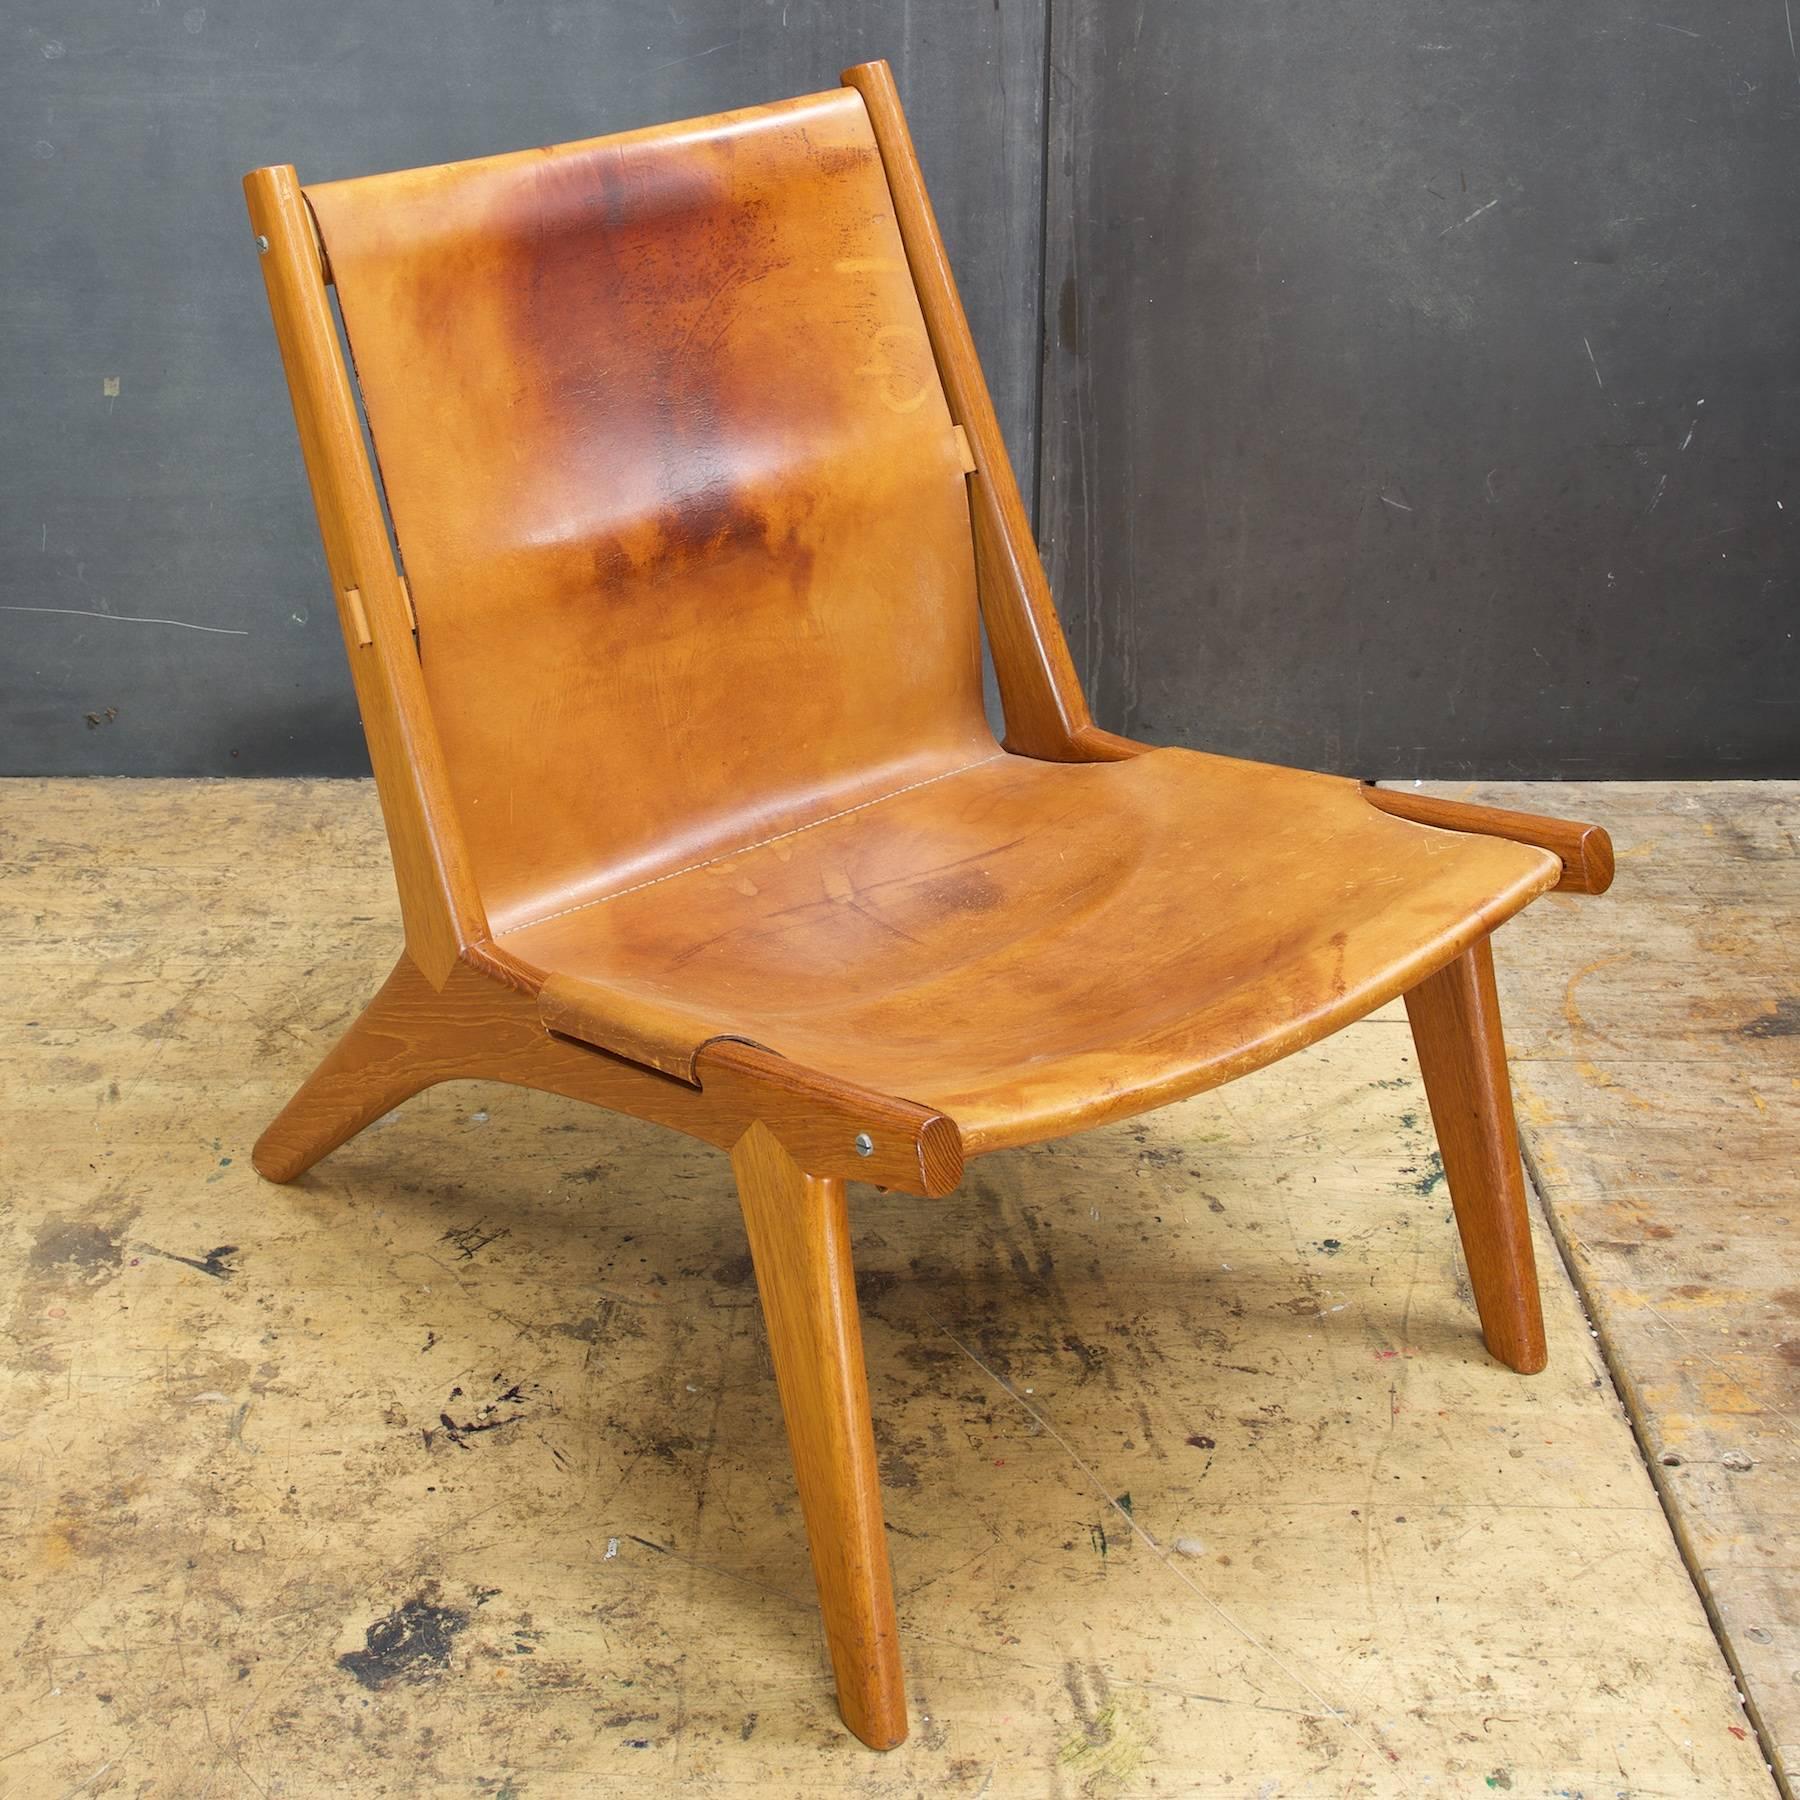 Exceedingly rare hunting chair is perfectly aged original leather sling.